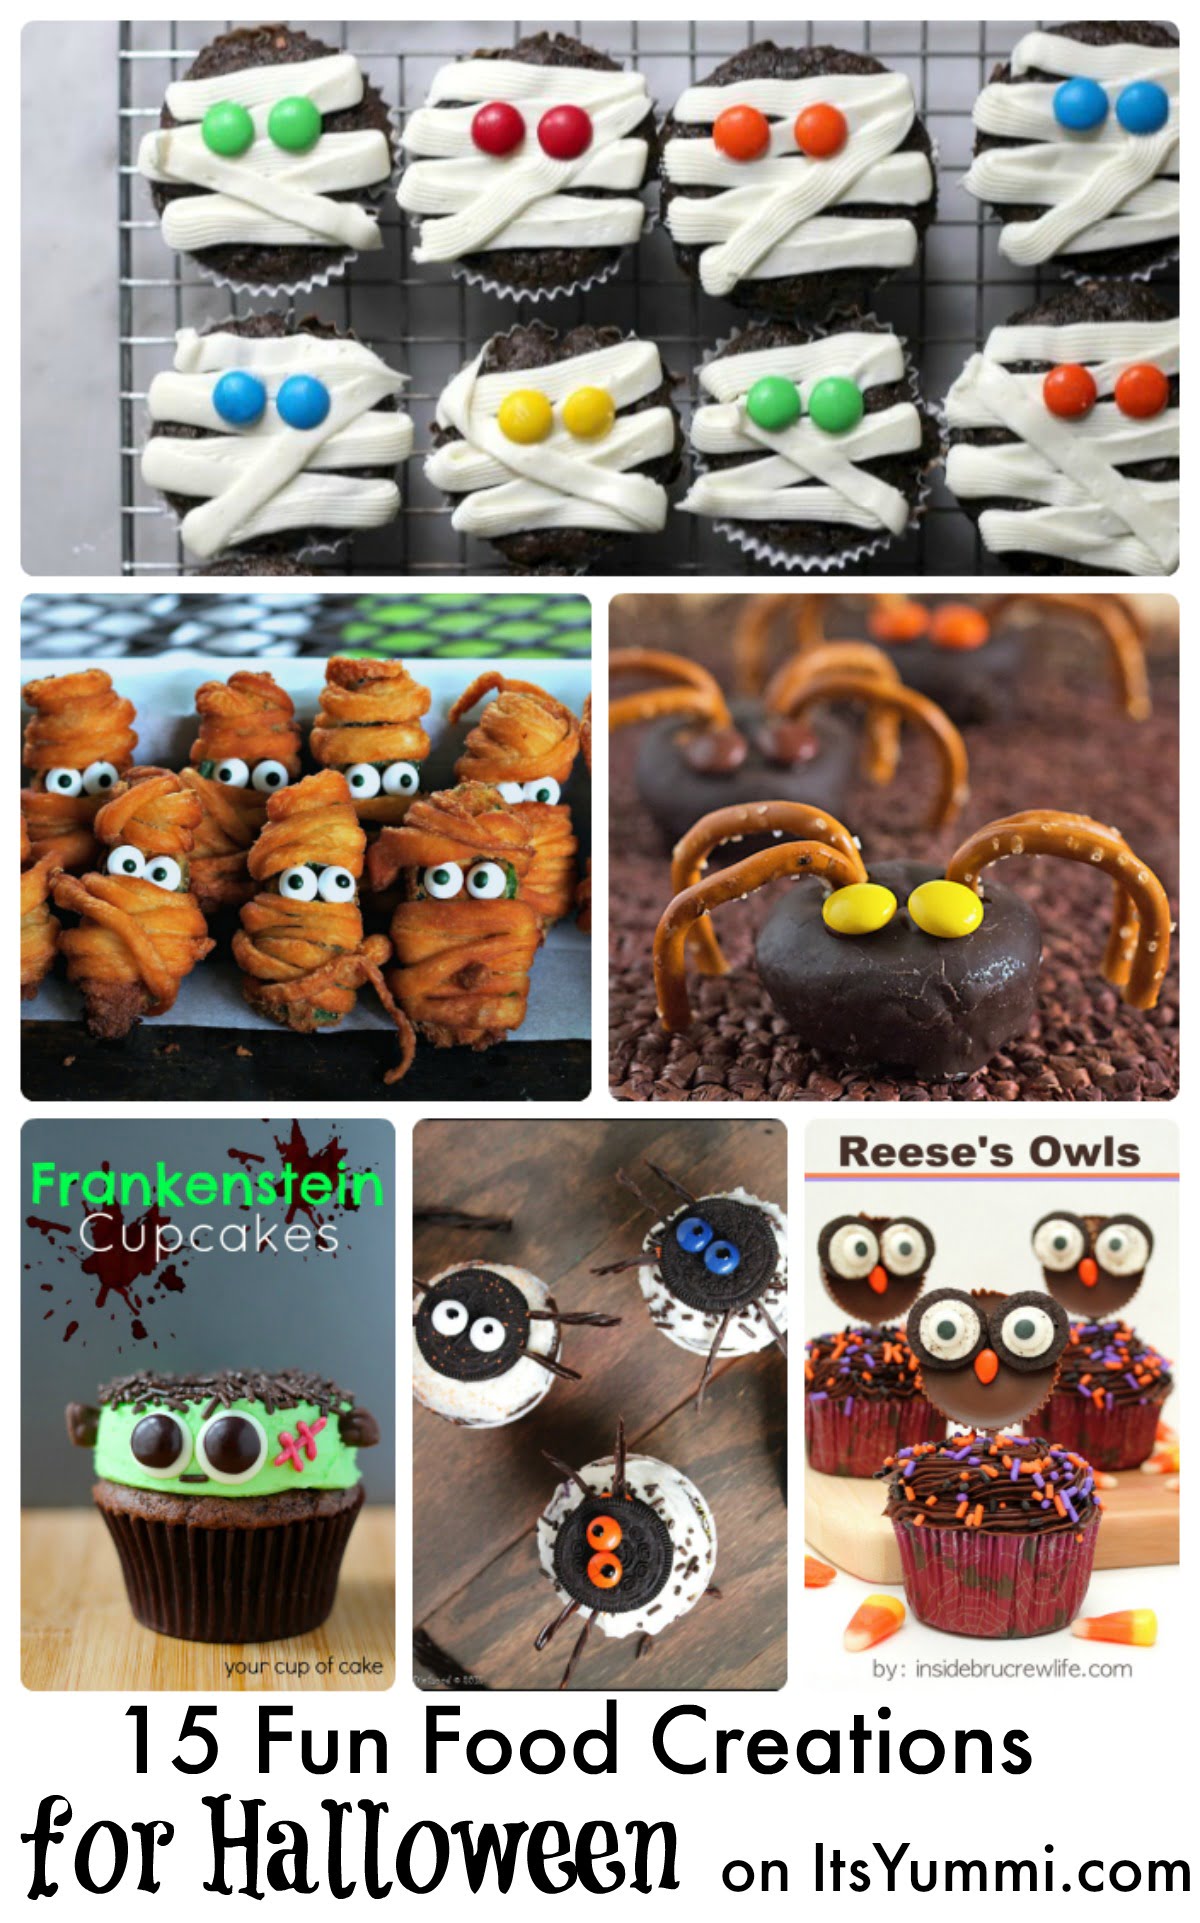 14+ Cute Halloween Food Ideas For Party Galleries